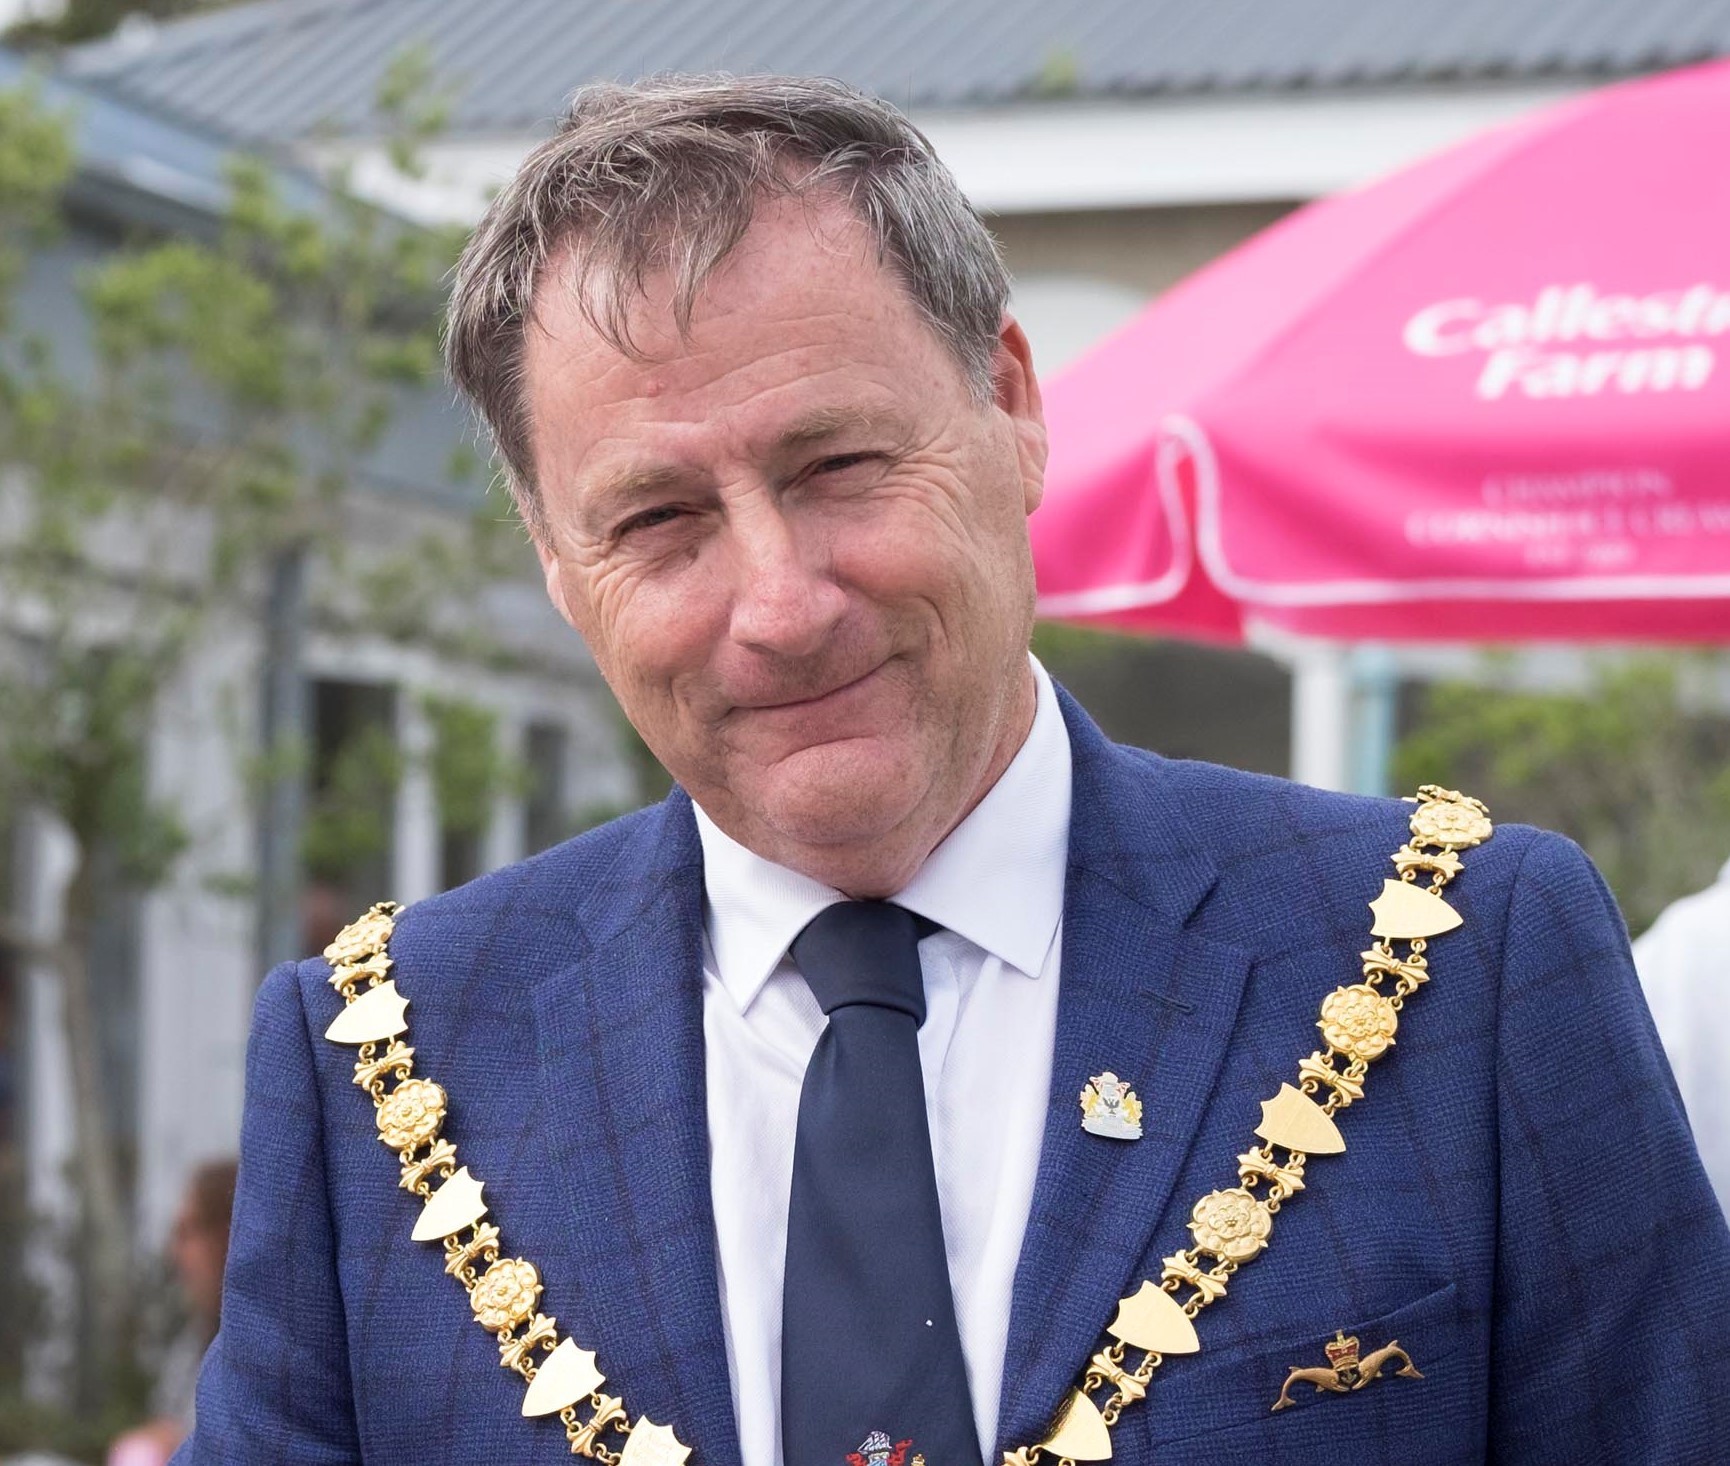 Falmouth mayor Steve Eva has been nominated for a Star councillor award - picture by Exposure Photo Agency